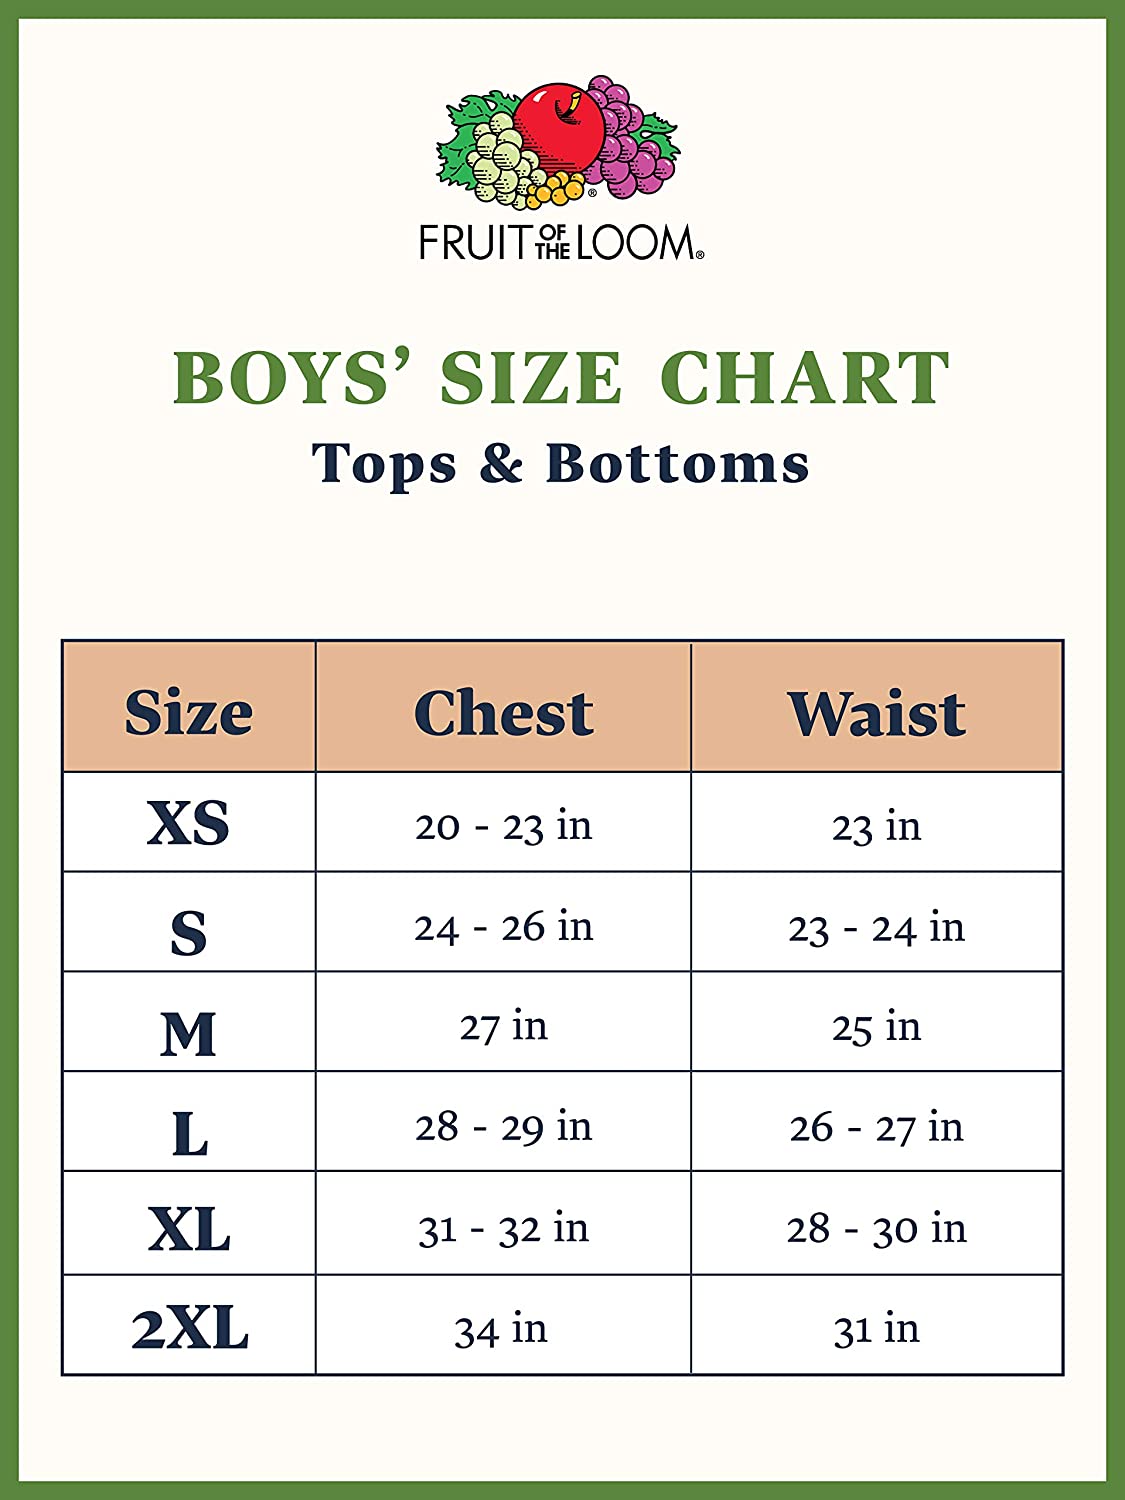 Fruit of the Loom Boys' Solid Multi-Color Soft Tank Tops, 3 Pack | eBay